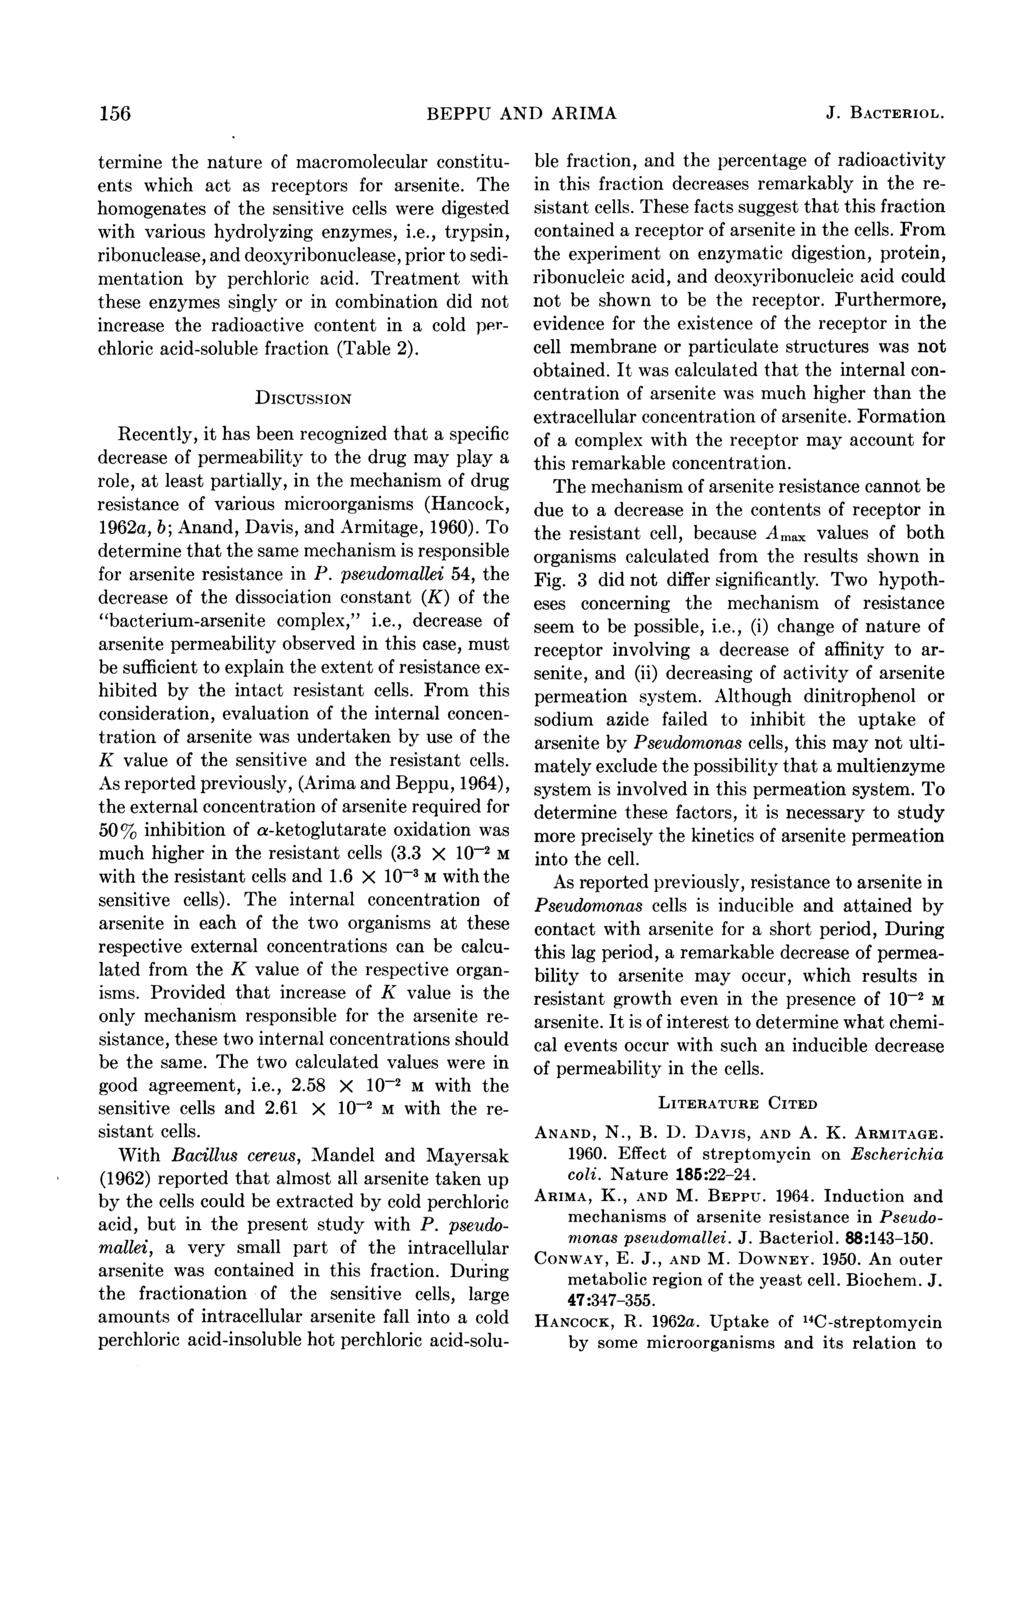 156 BEPPU AND ARIMA J. BACTERIOL. termine the nature of macromolecular constituents which act as receptors for arsenite.